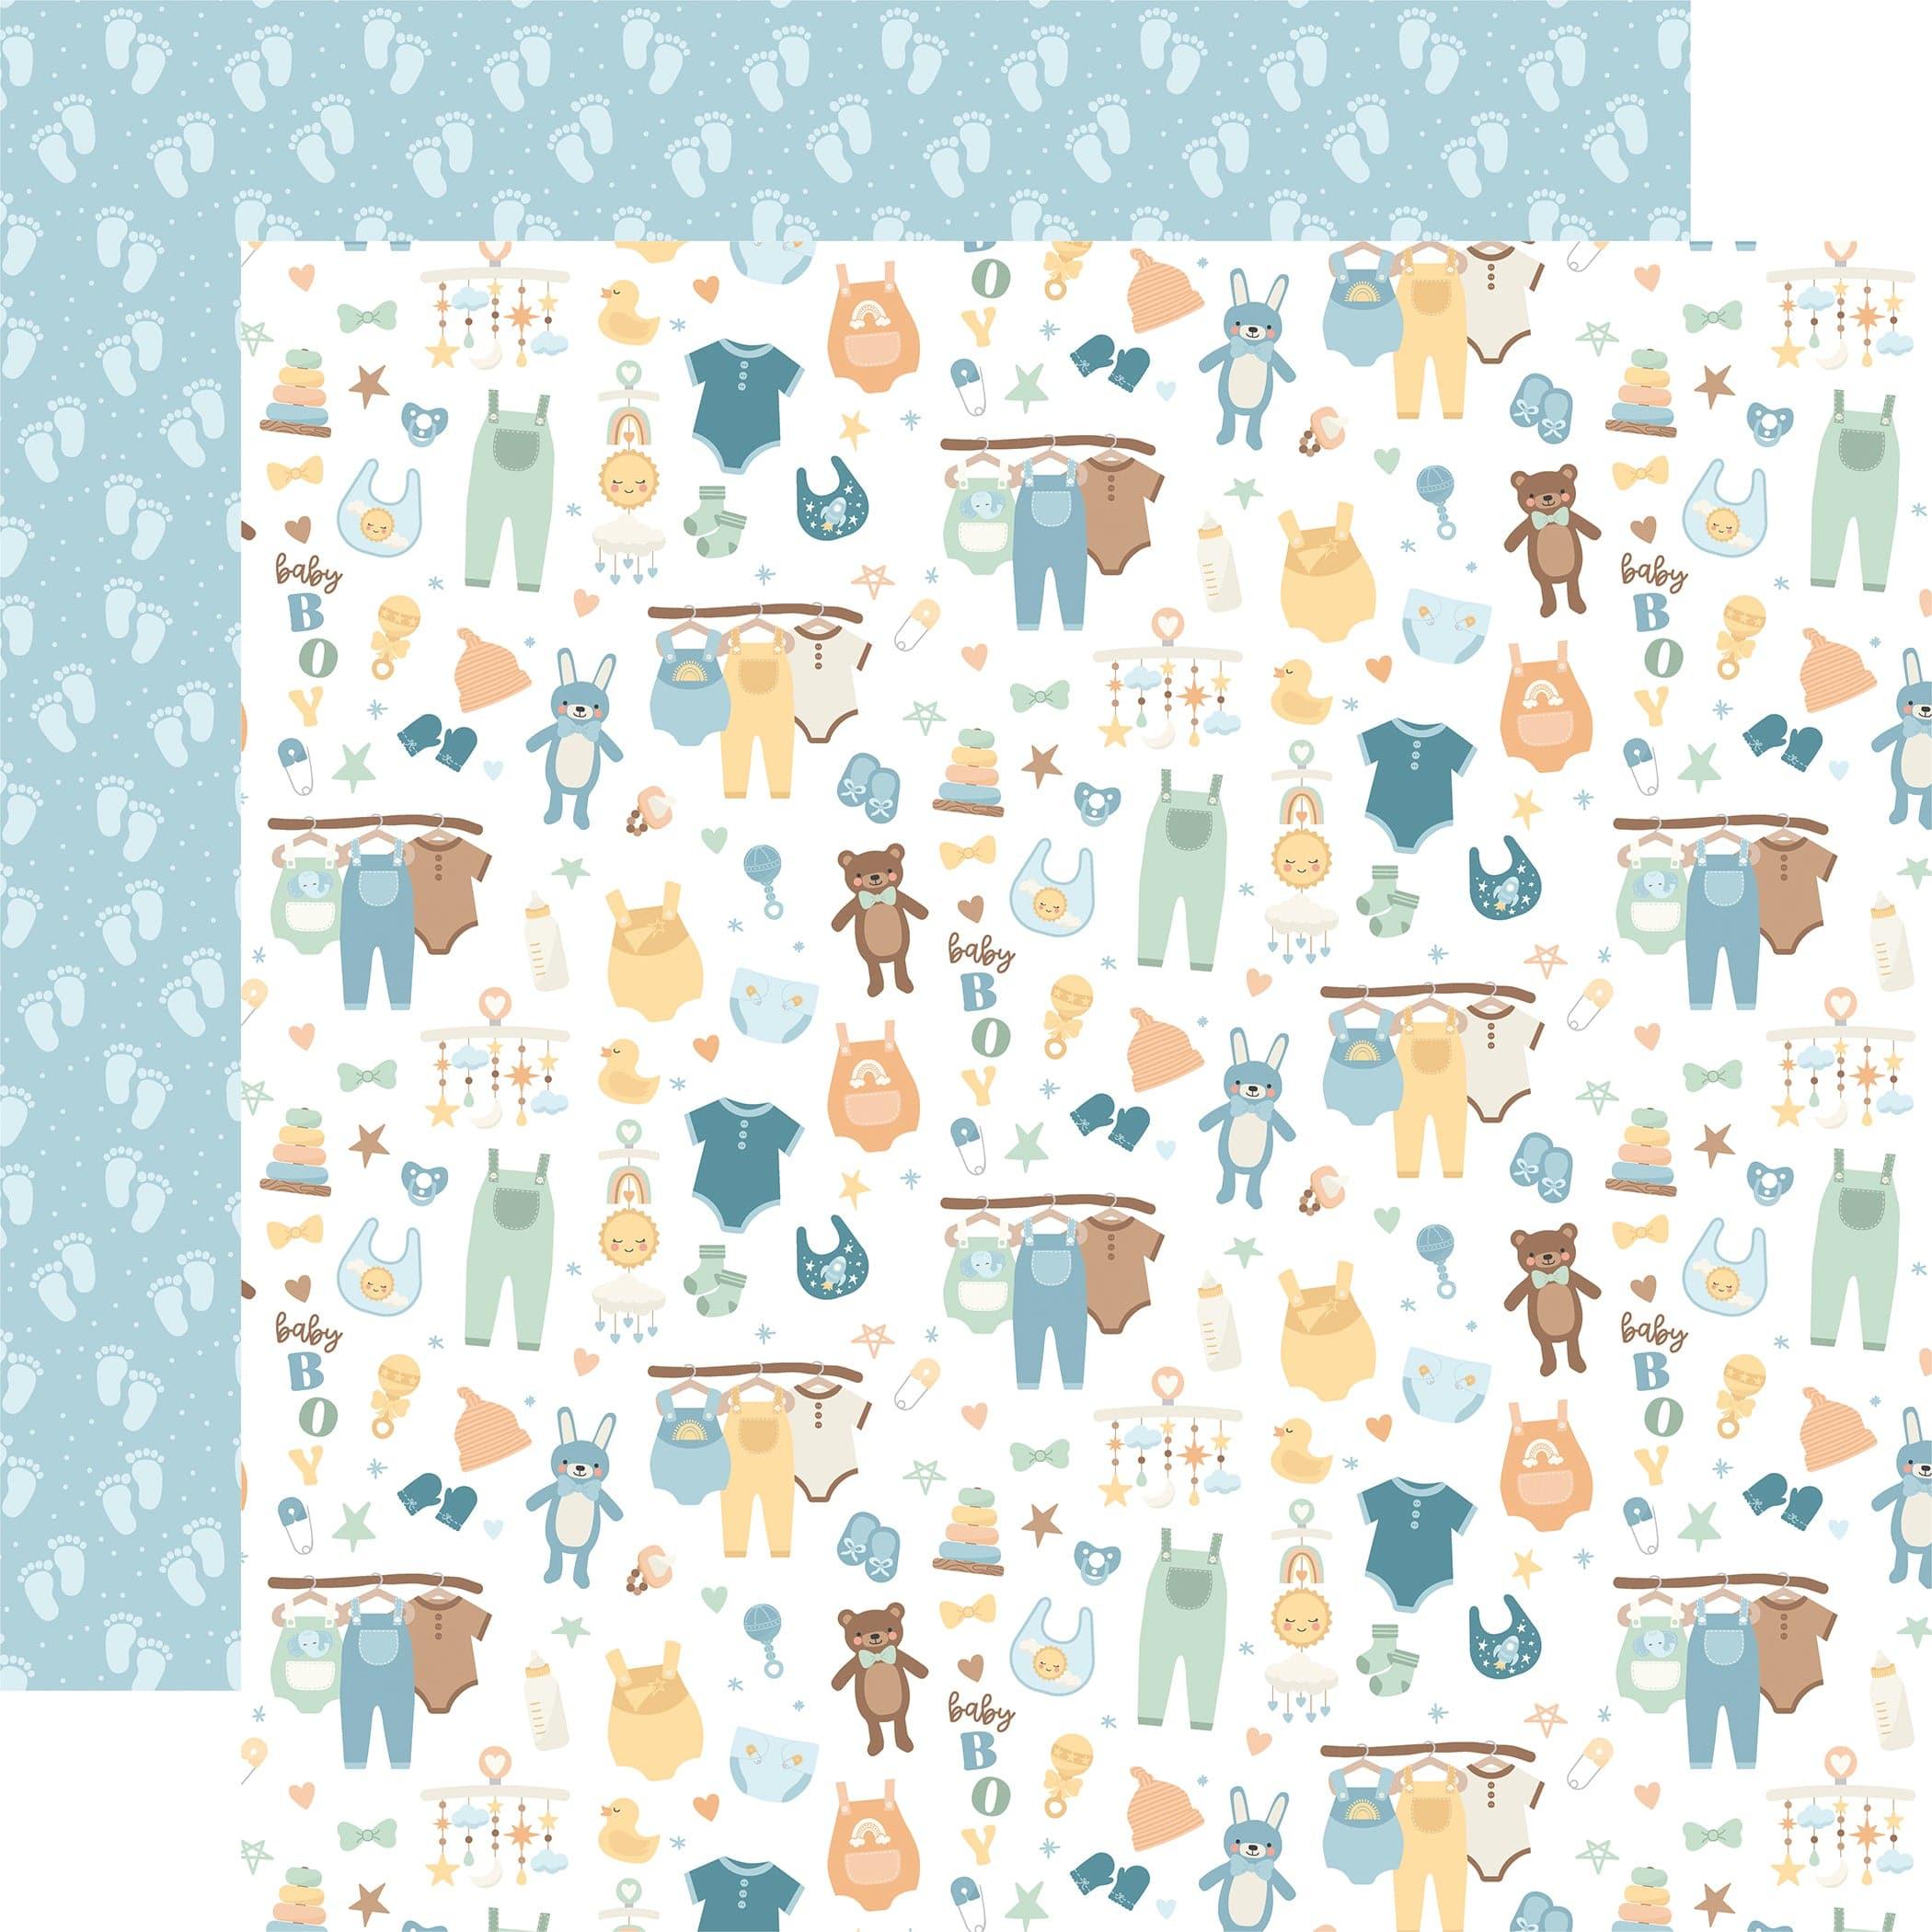 Our Baby Boy Collection Baby World 12 x 12 Double-Sided Scrapbook Paper by Echo Park Paper - Scrapbook Supply Companies